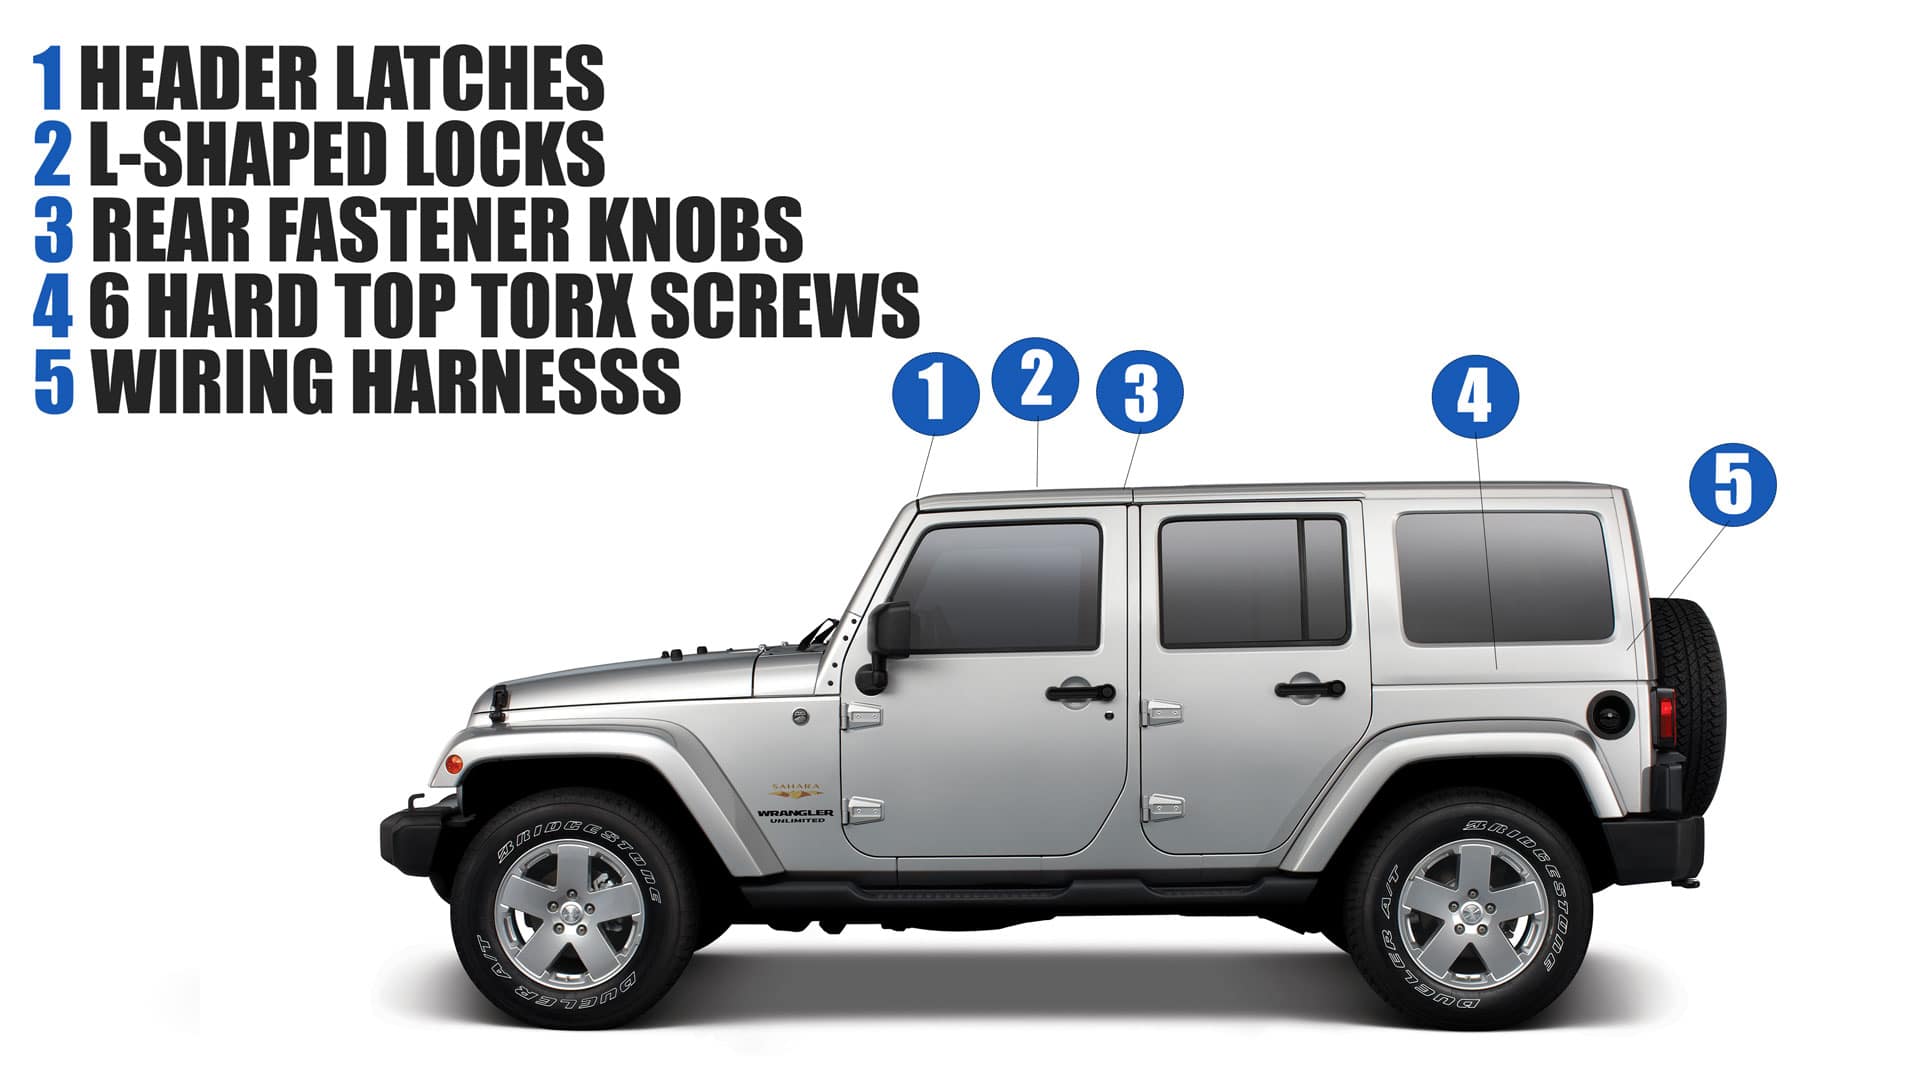 Remove The Hard Top On Your Wrangler Faqs Safford Of Warrenton